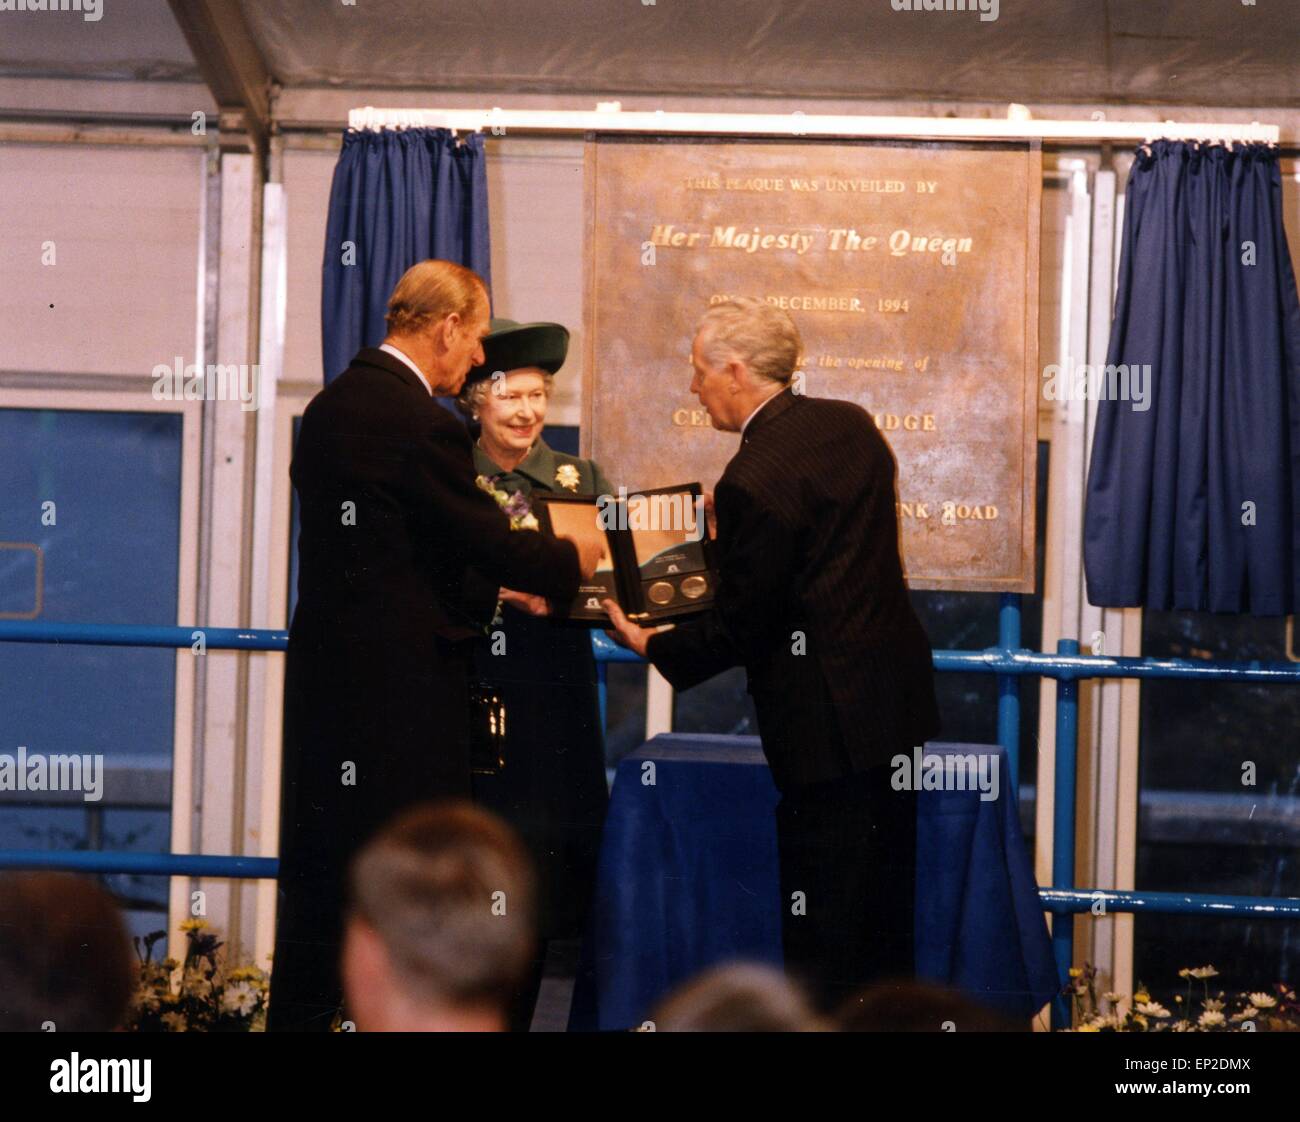 The Queen visits Manchester, 1st December 1994. Bill Morgas, Chairman of Trafford Park Development, presents Queen with memento after official opening of Centenary Bridge at Trafford Park. Stock Photo